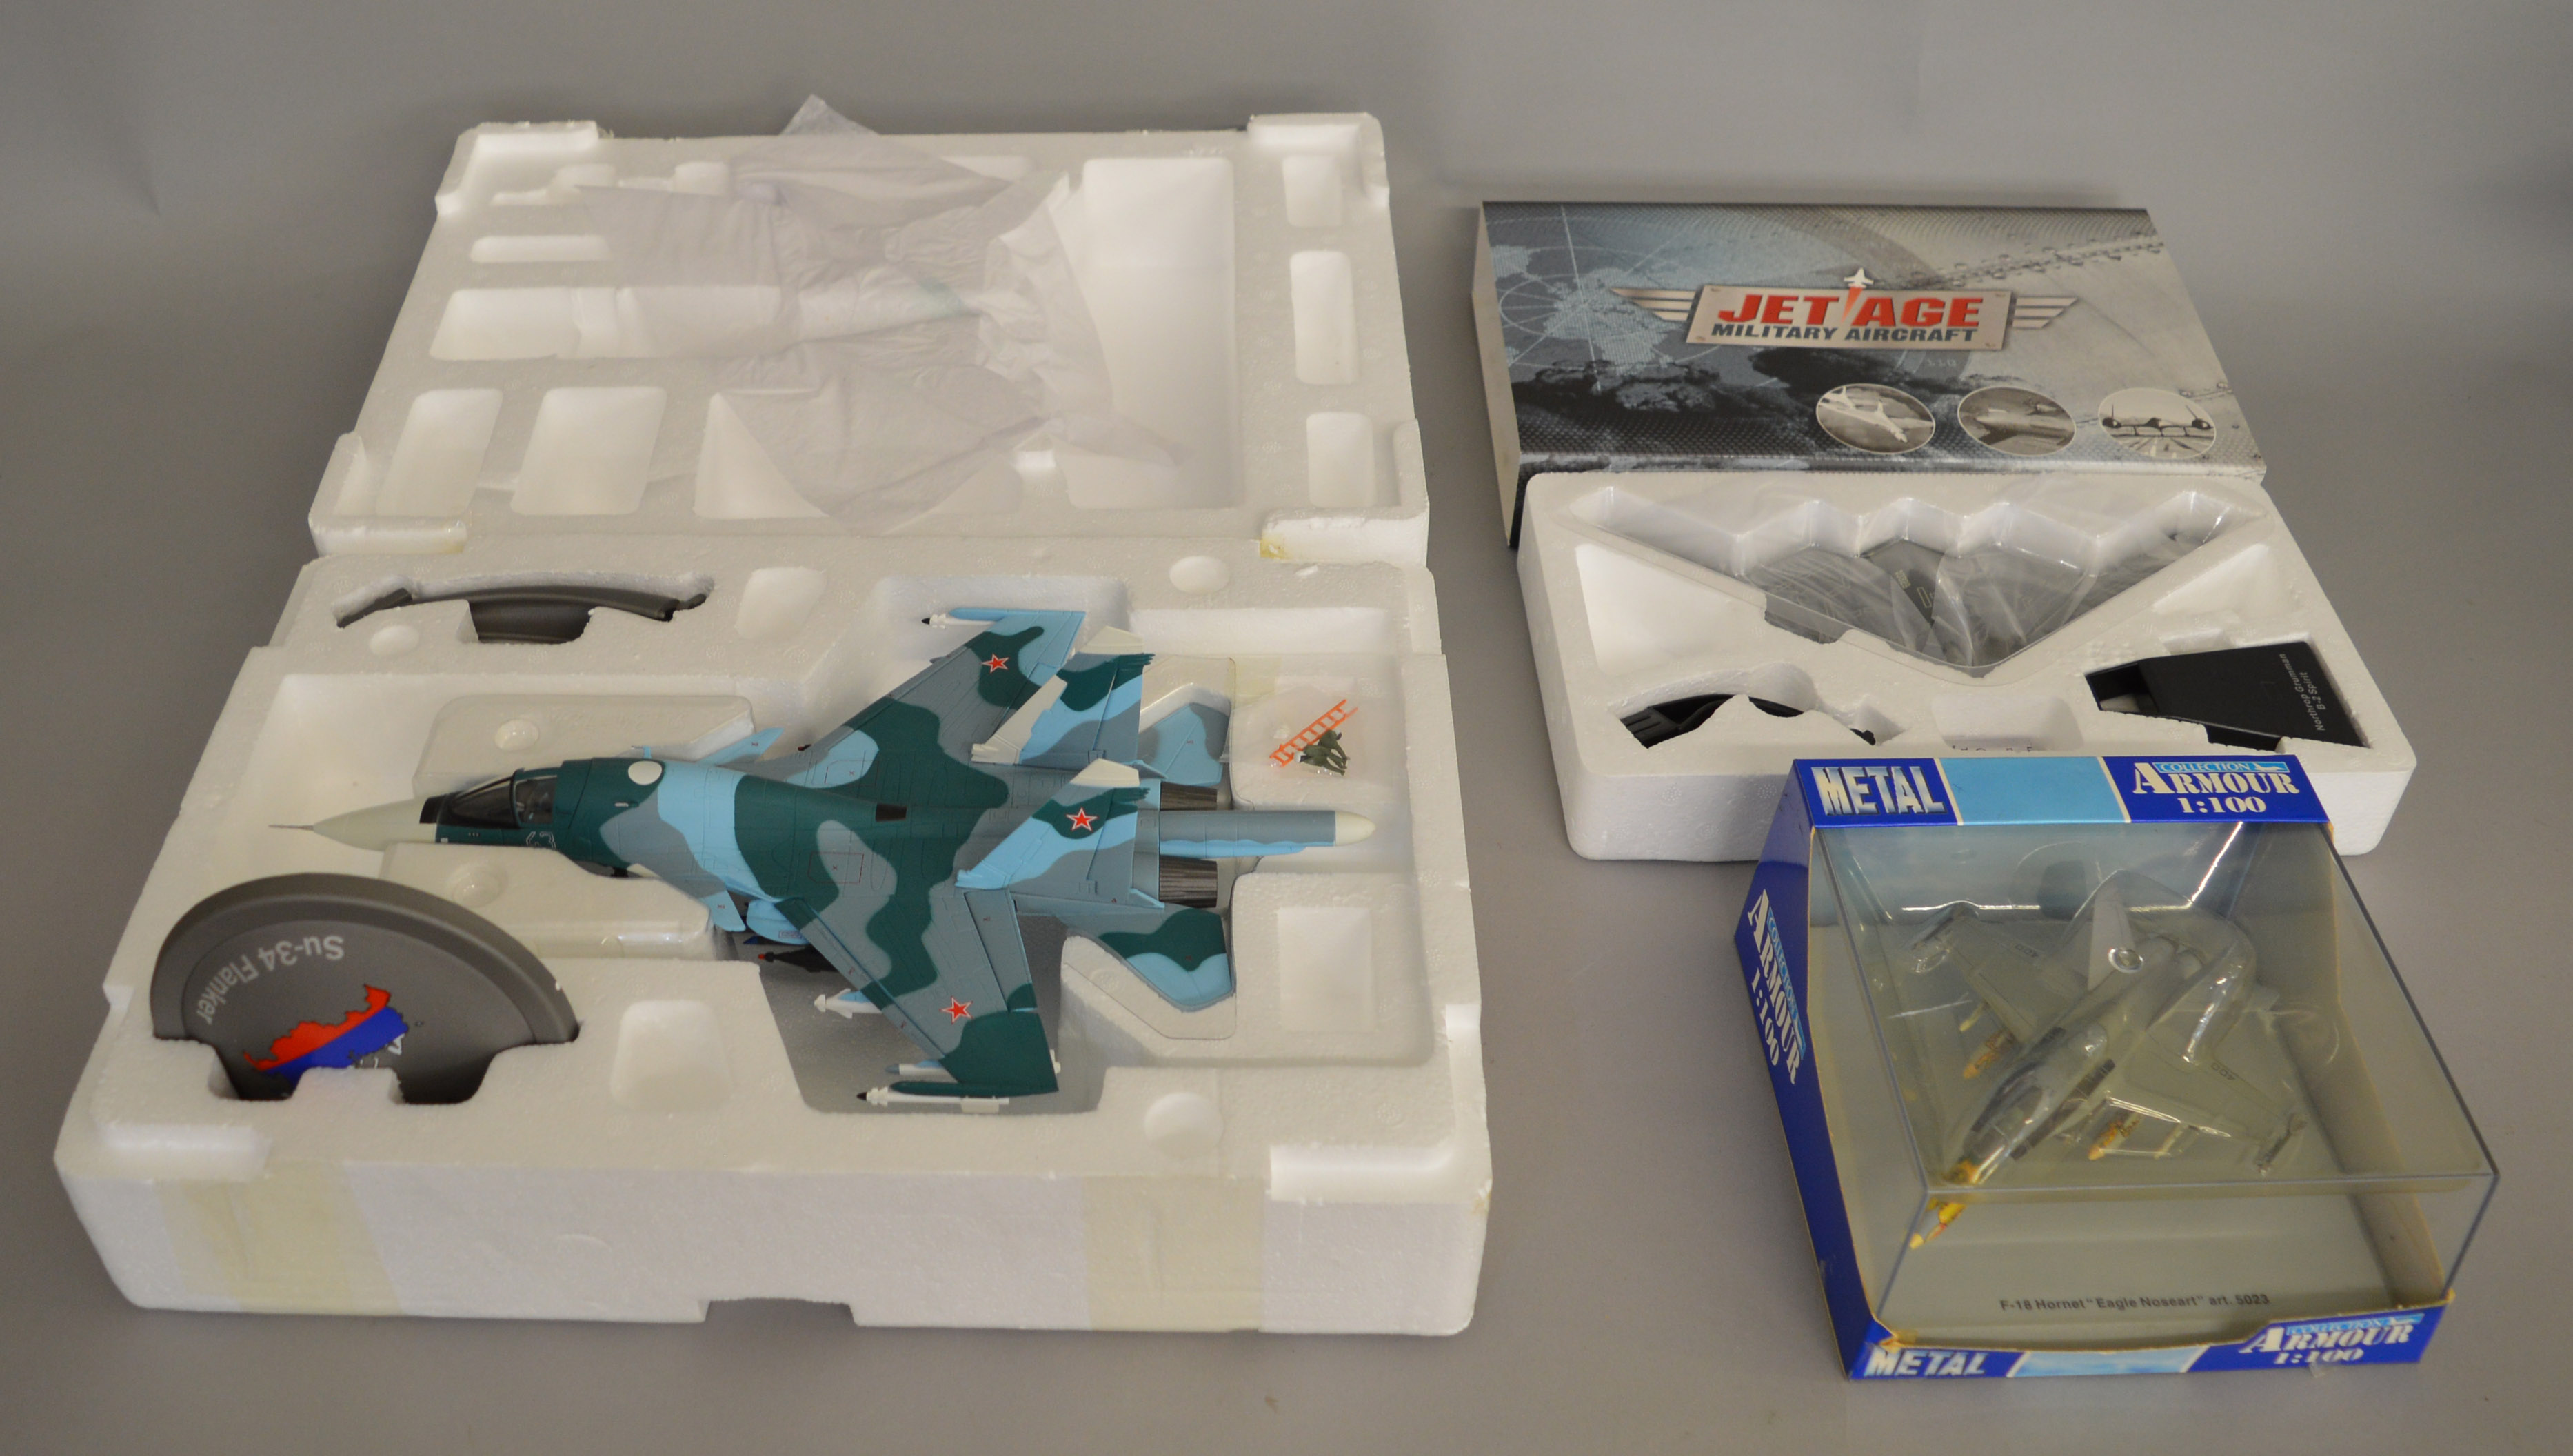 3x Aeroplane models including 1:100 scale Collection Armour and a Jet Age Military Aircraft example,